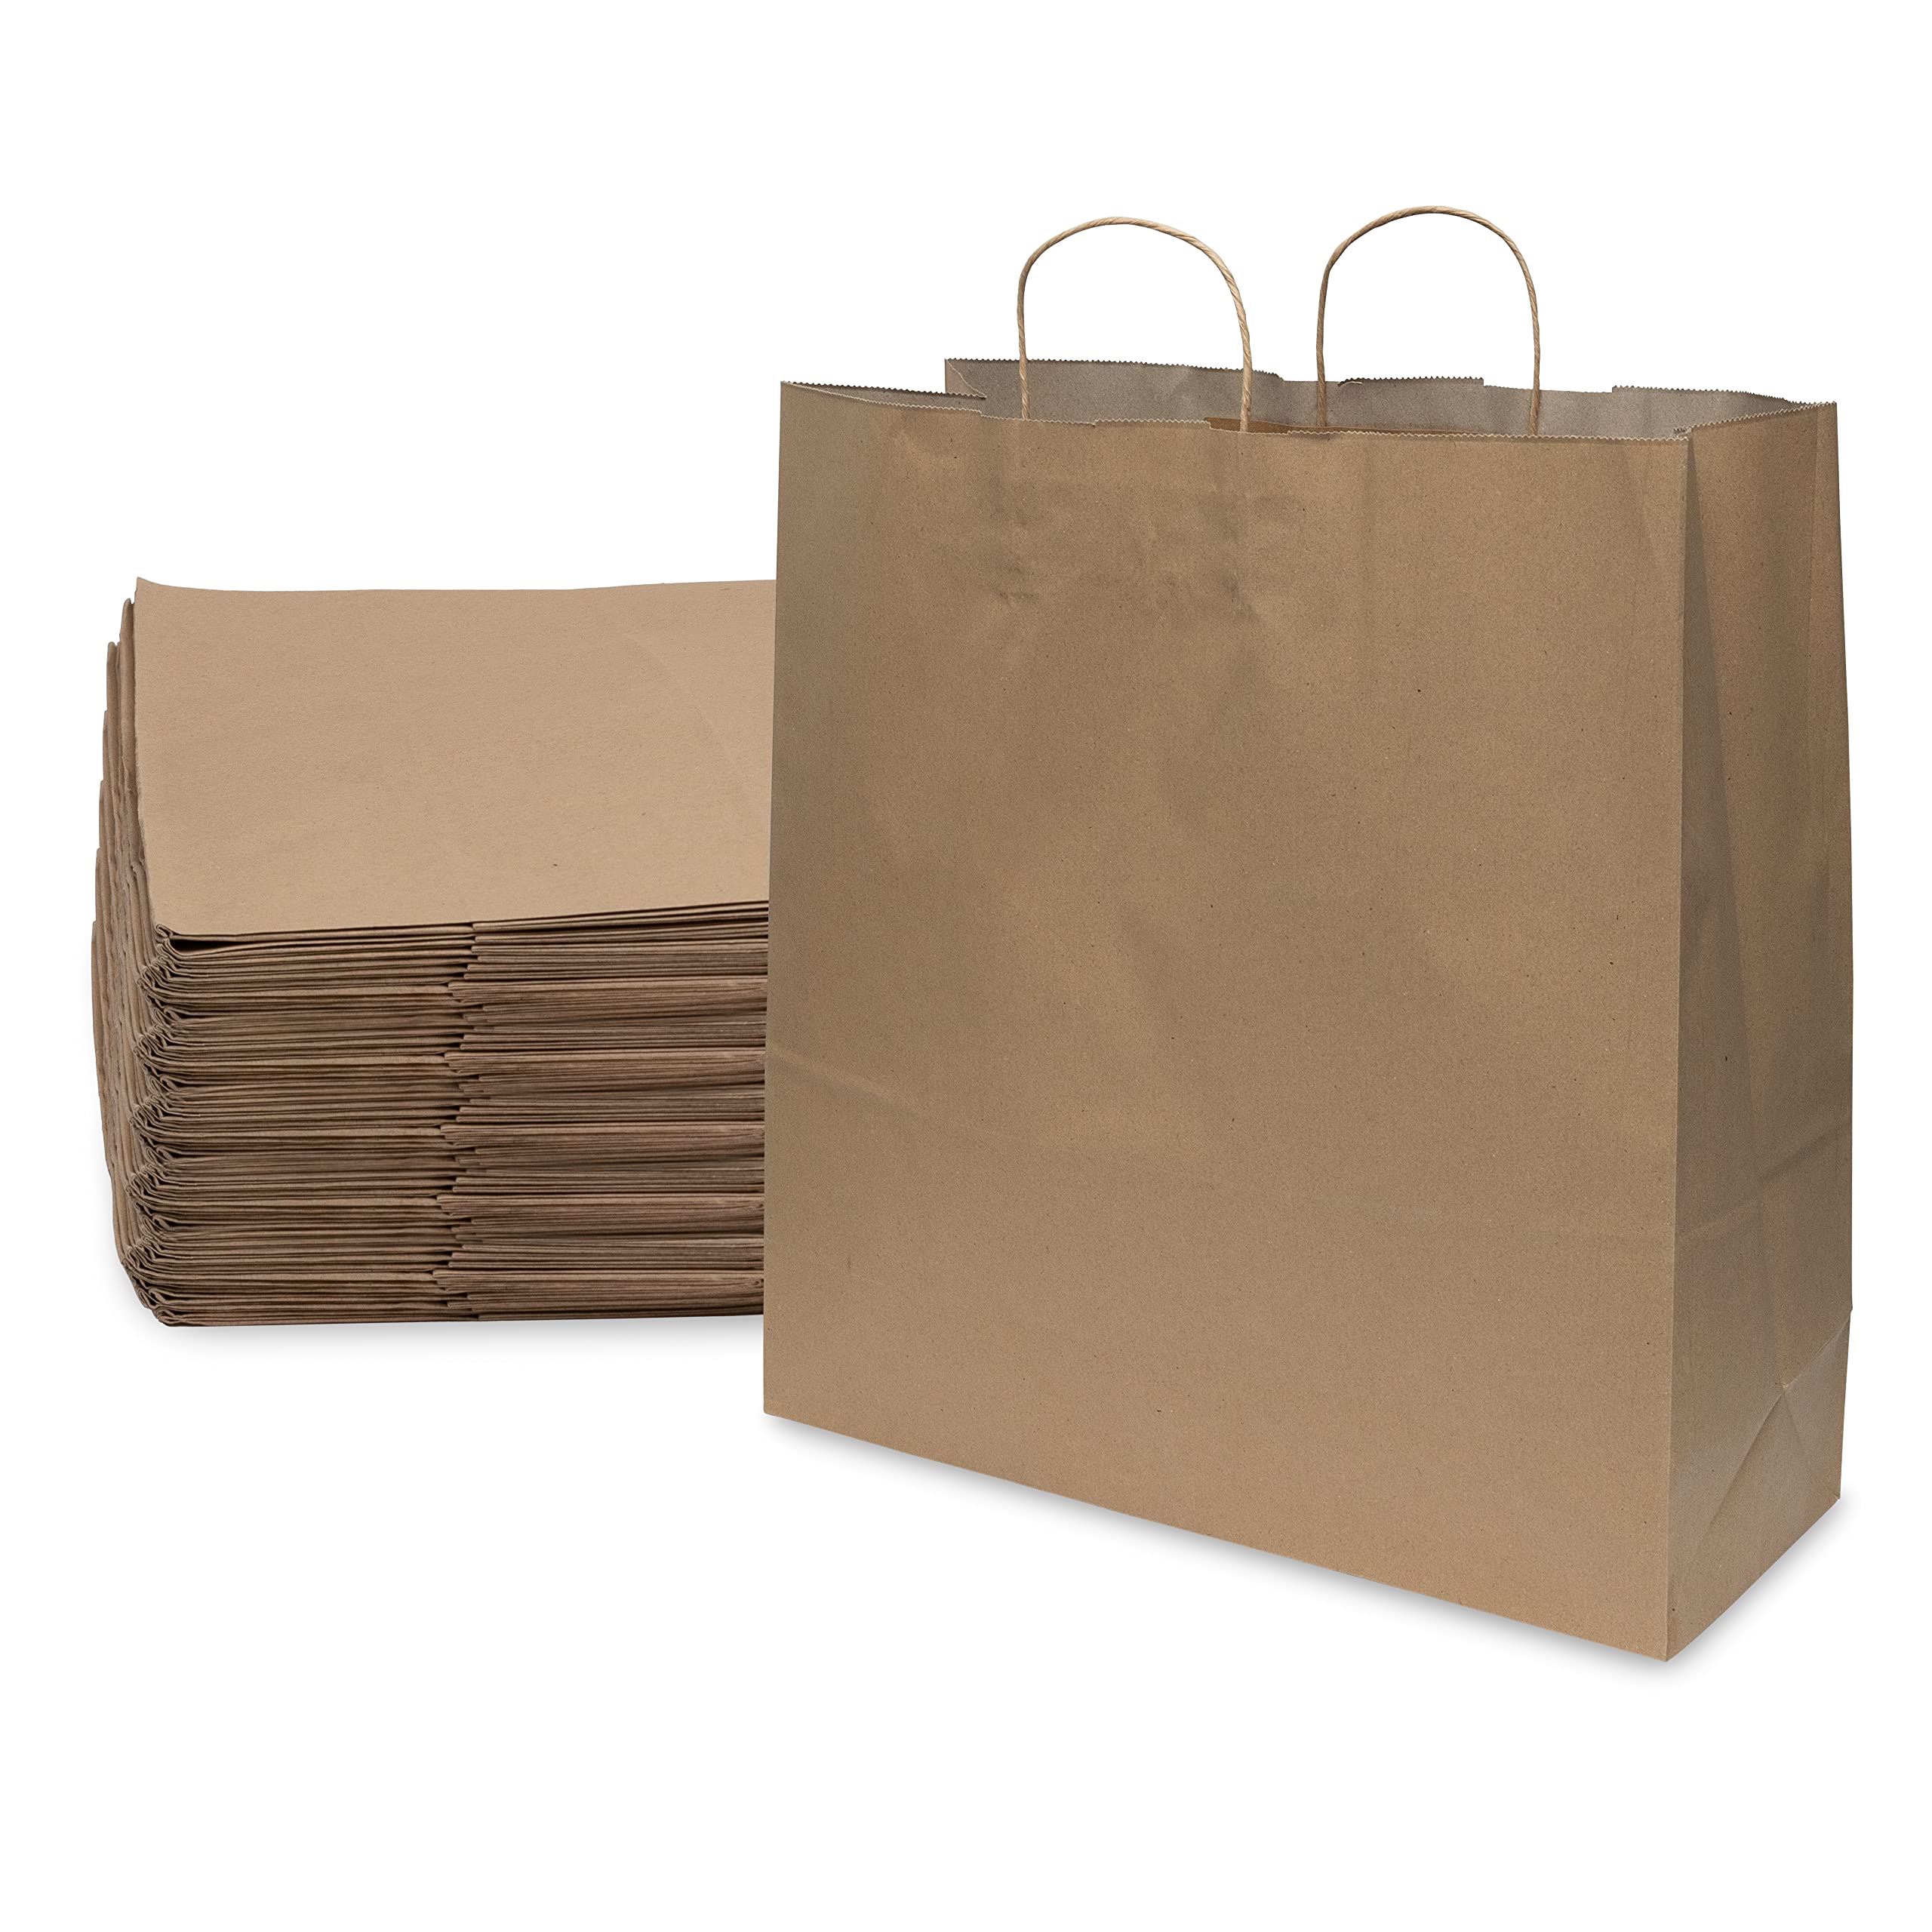 Brown Paper Bags with Handles - 18x7x18.75 Inch 100 Pack Large Plain Brown Paper Bags, Durable Kraft Paper for Retail Stores, Small Business, Shopping, Crafts, Gifts, Grocery items, in Bulk  - Like New